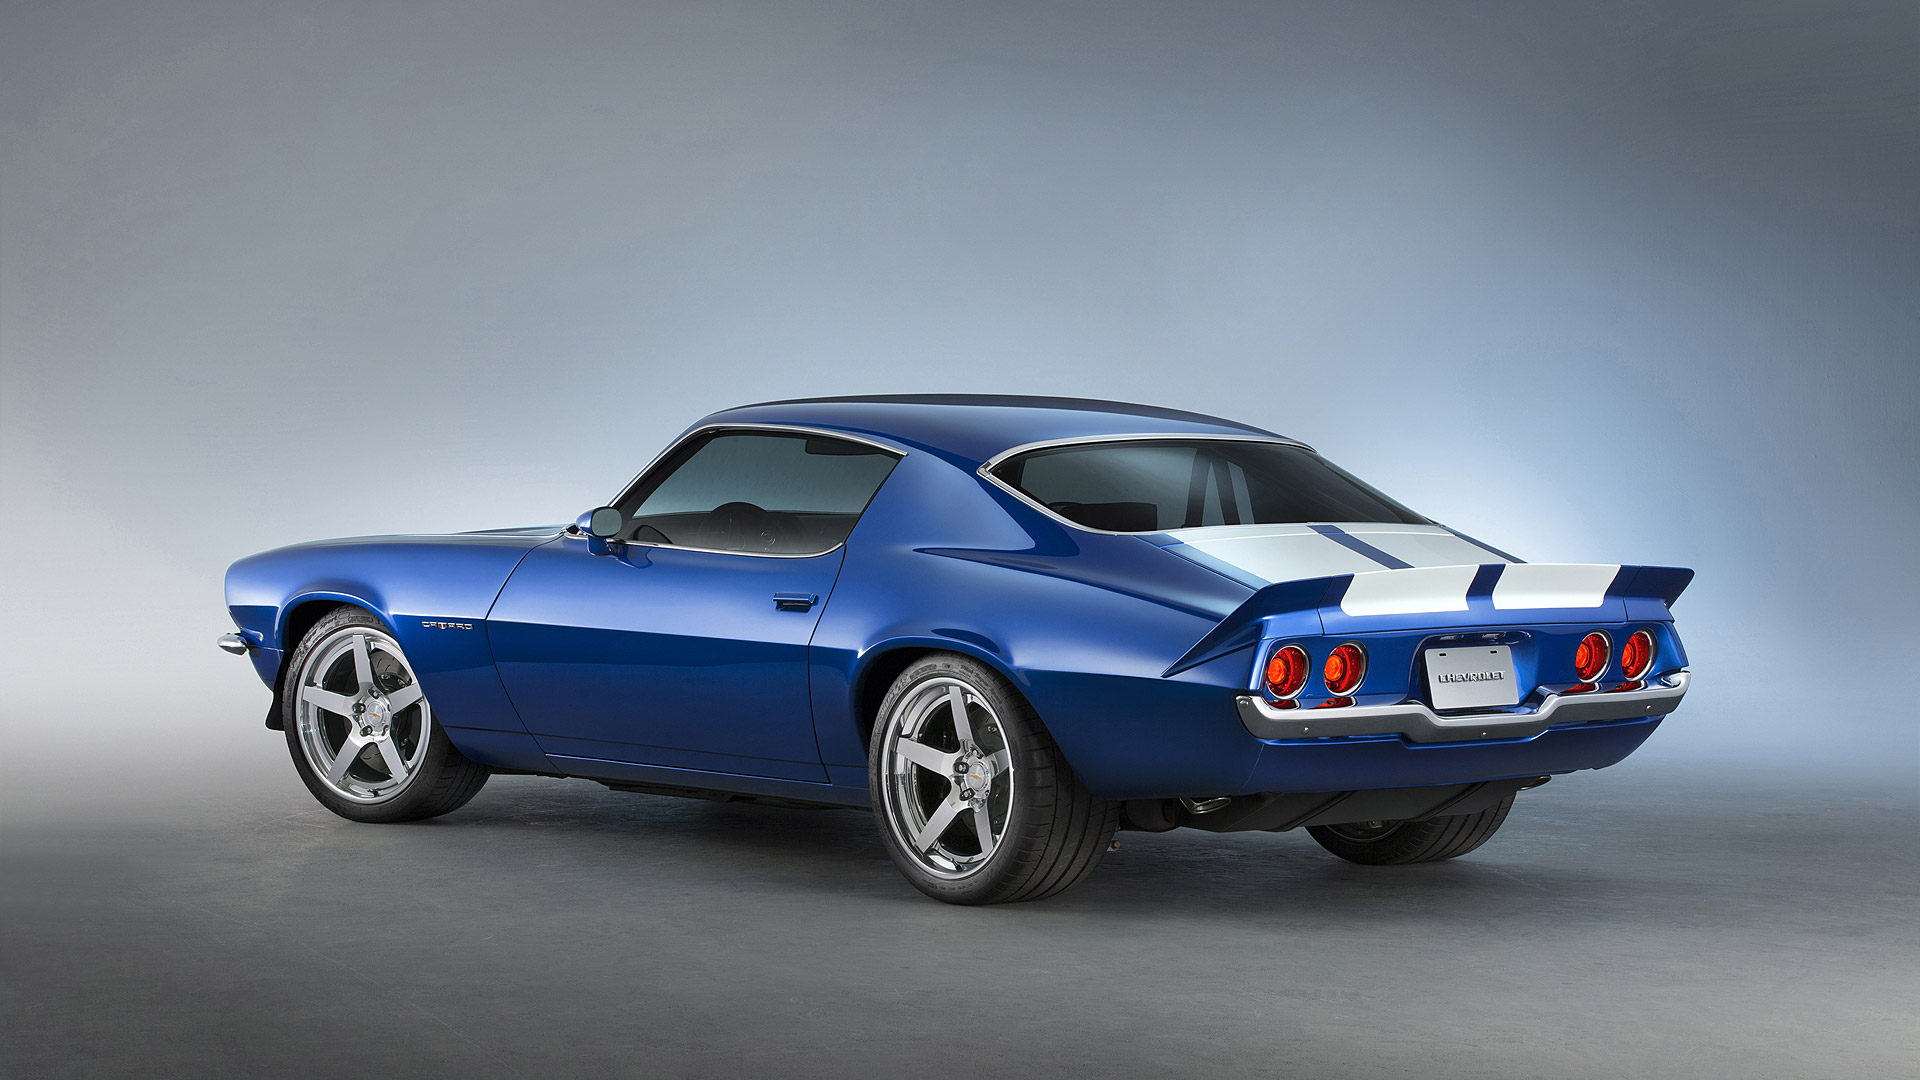  2015 Chevrolet 1970 Camaro RS Supercharged LT4 Concept Wallpaper.